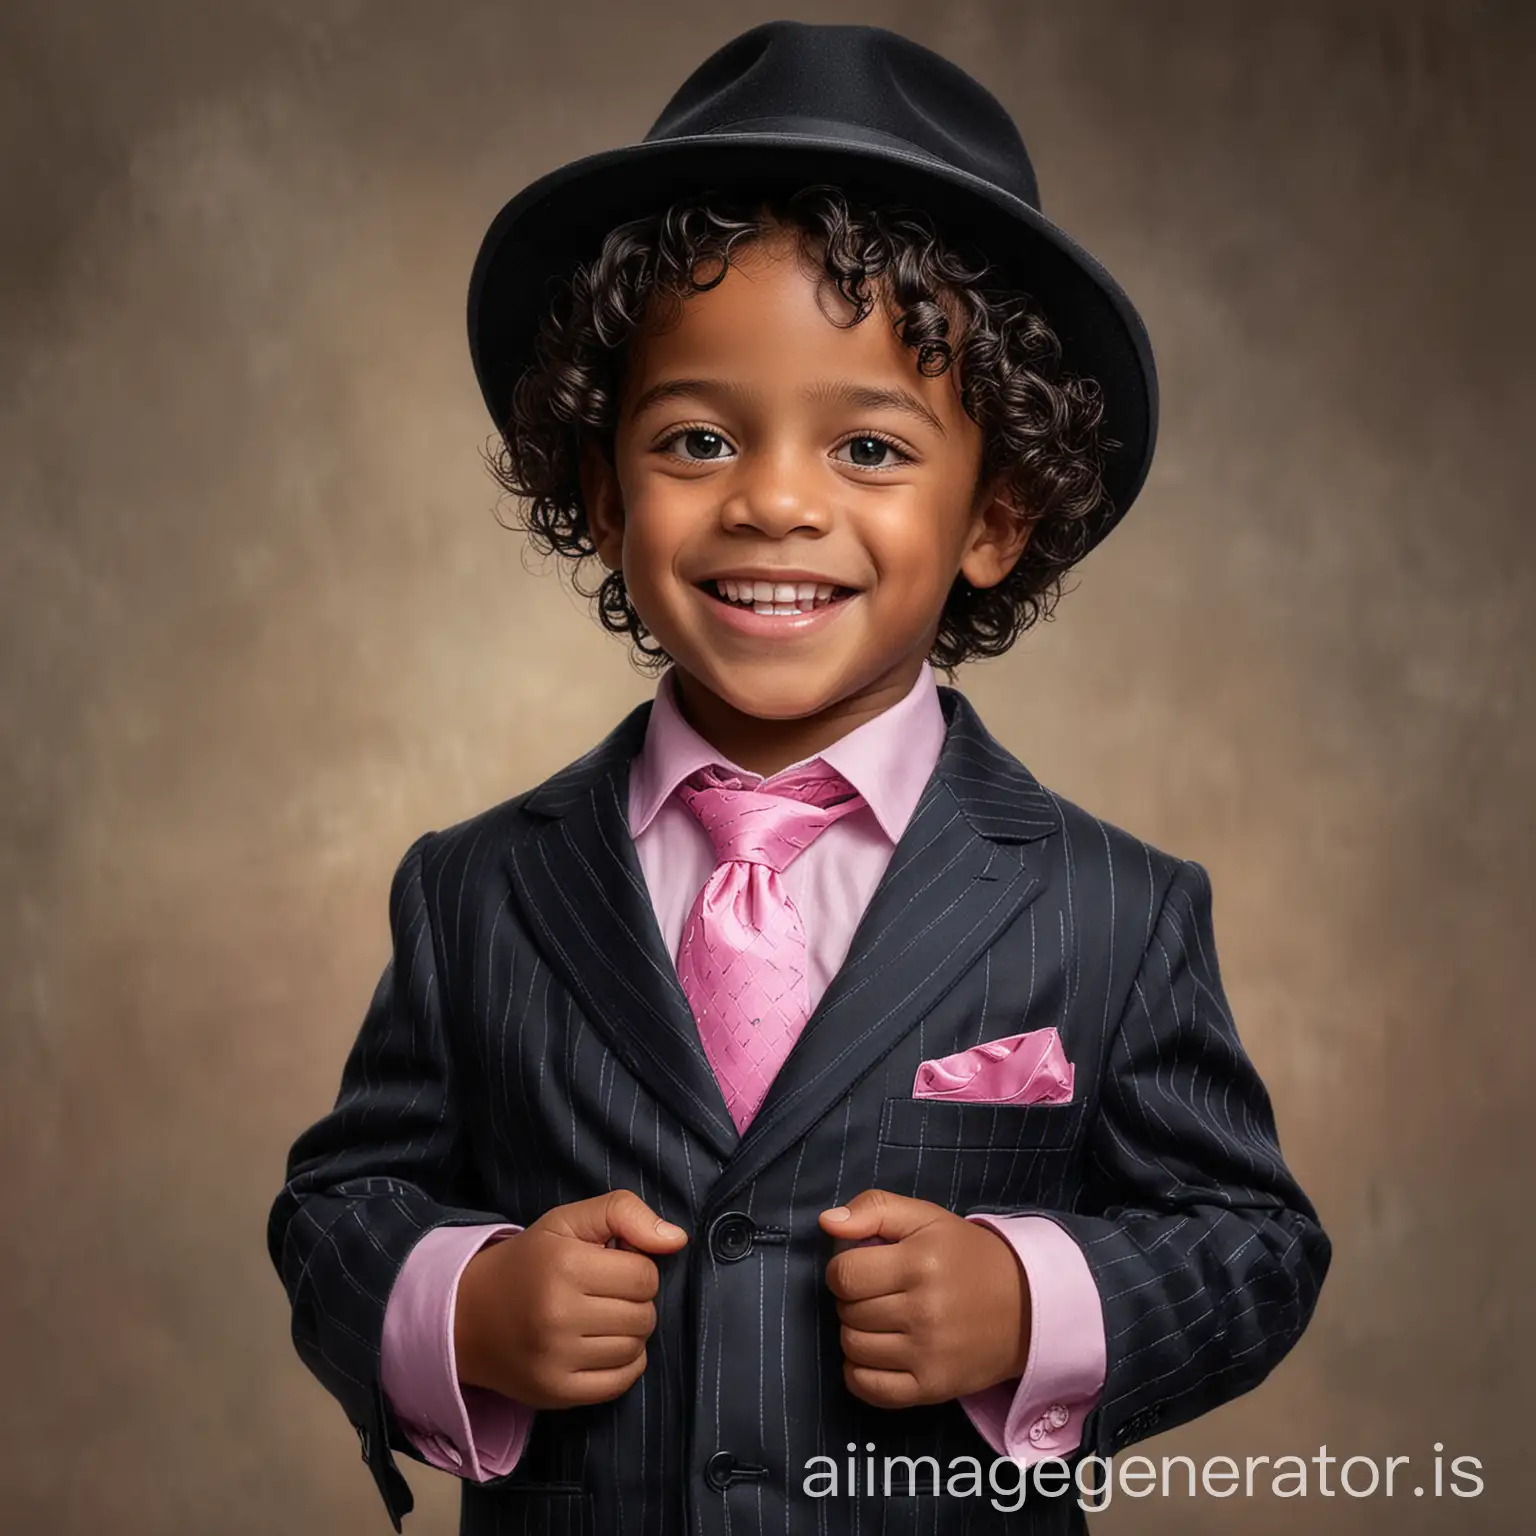 A realistic portrait of a 4 year old black Colombian boy, who is small for his age . He has shoulder length curly hair, light black skin and blue eyes. He should be wearing a 3 piece black pinstripe suit, with a pink shirt and a pink fedora with a black and pink feather. He should have a big laughing smile and his hands holding his jacket over one shoulder